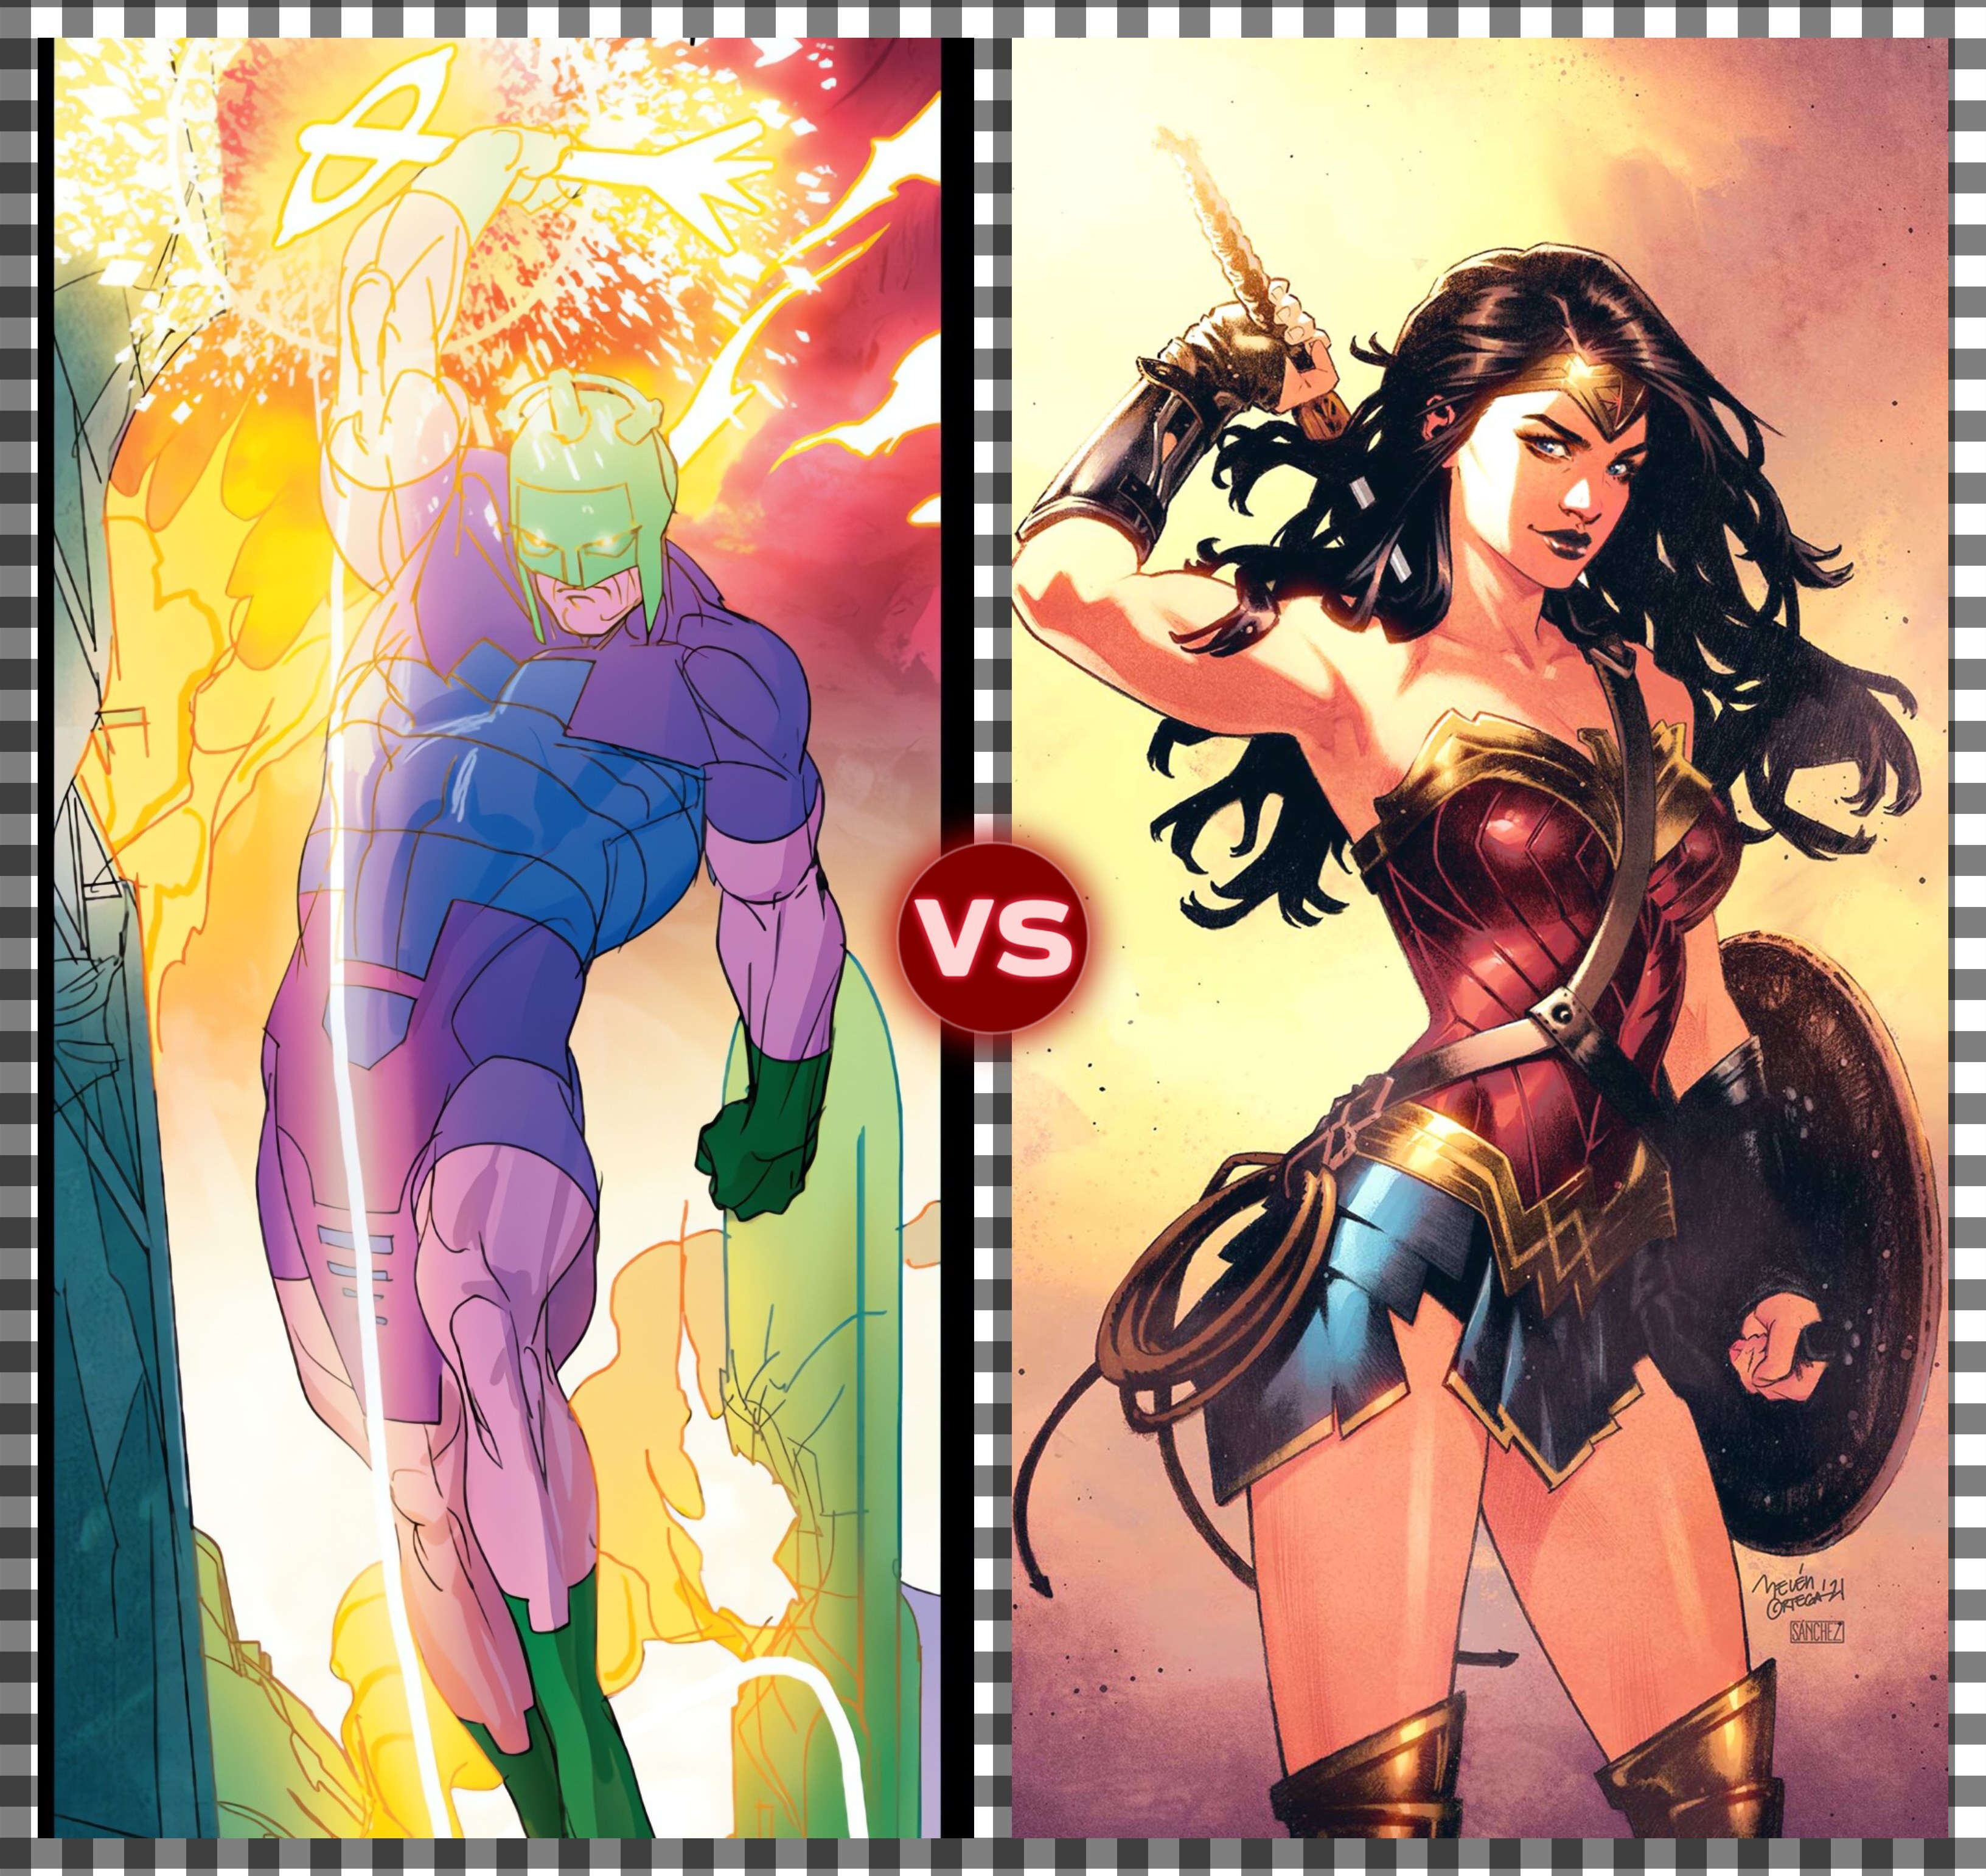 angeli noelle valencia recommends Wonder Woman Vs Warlord